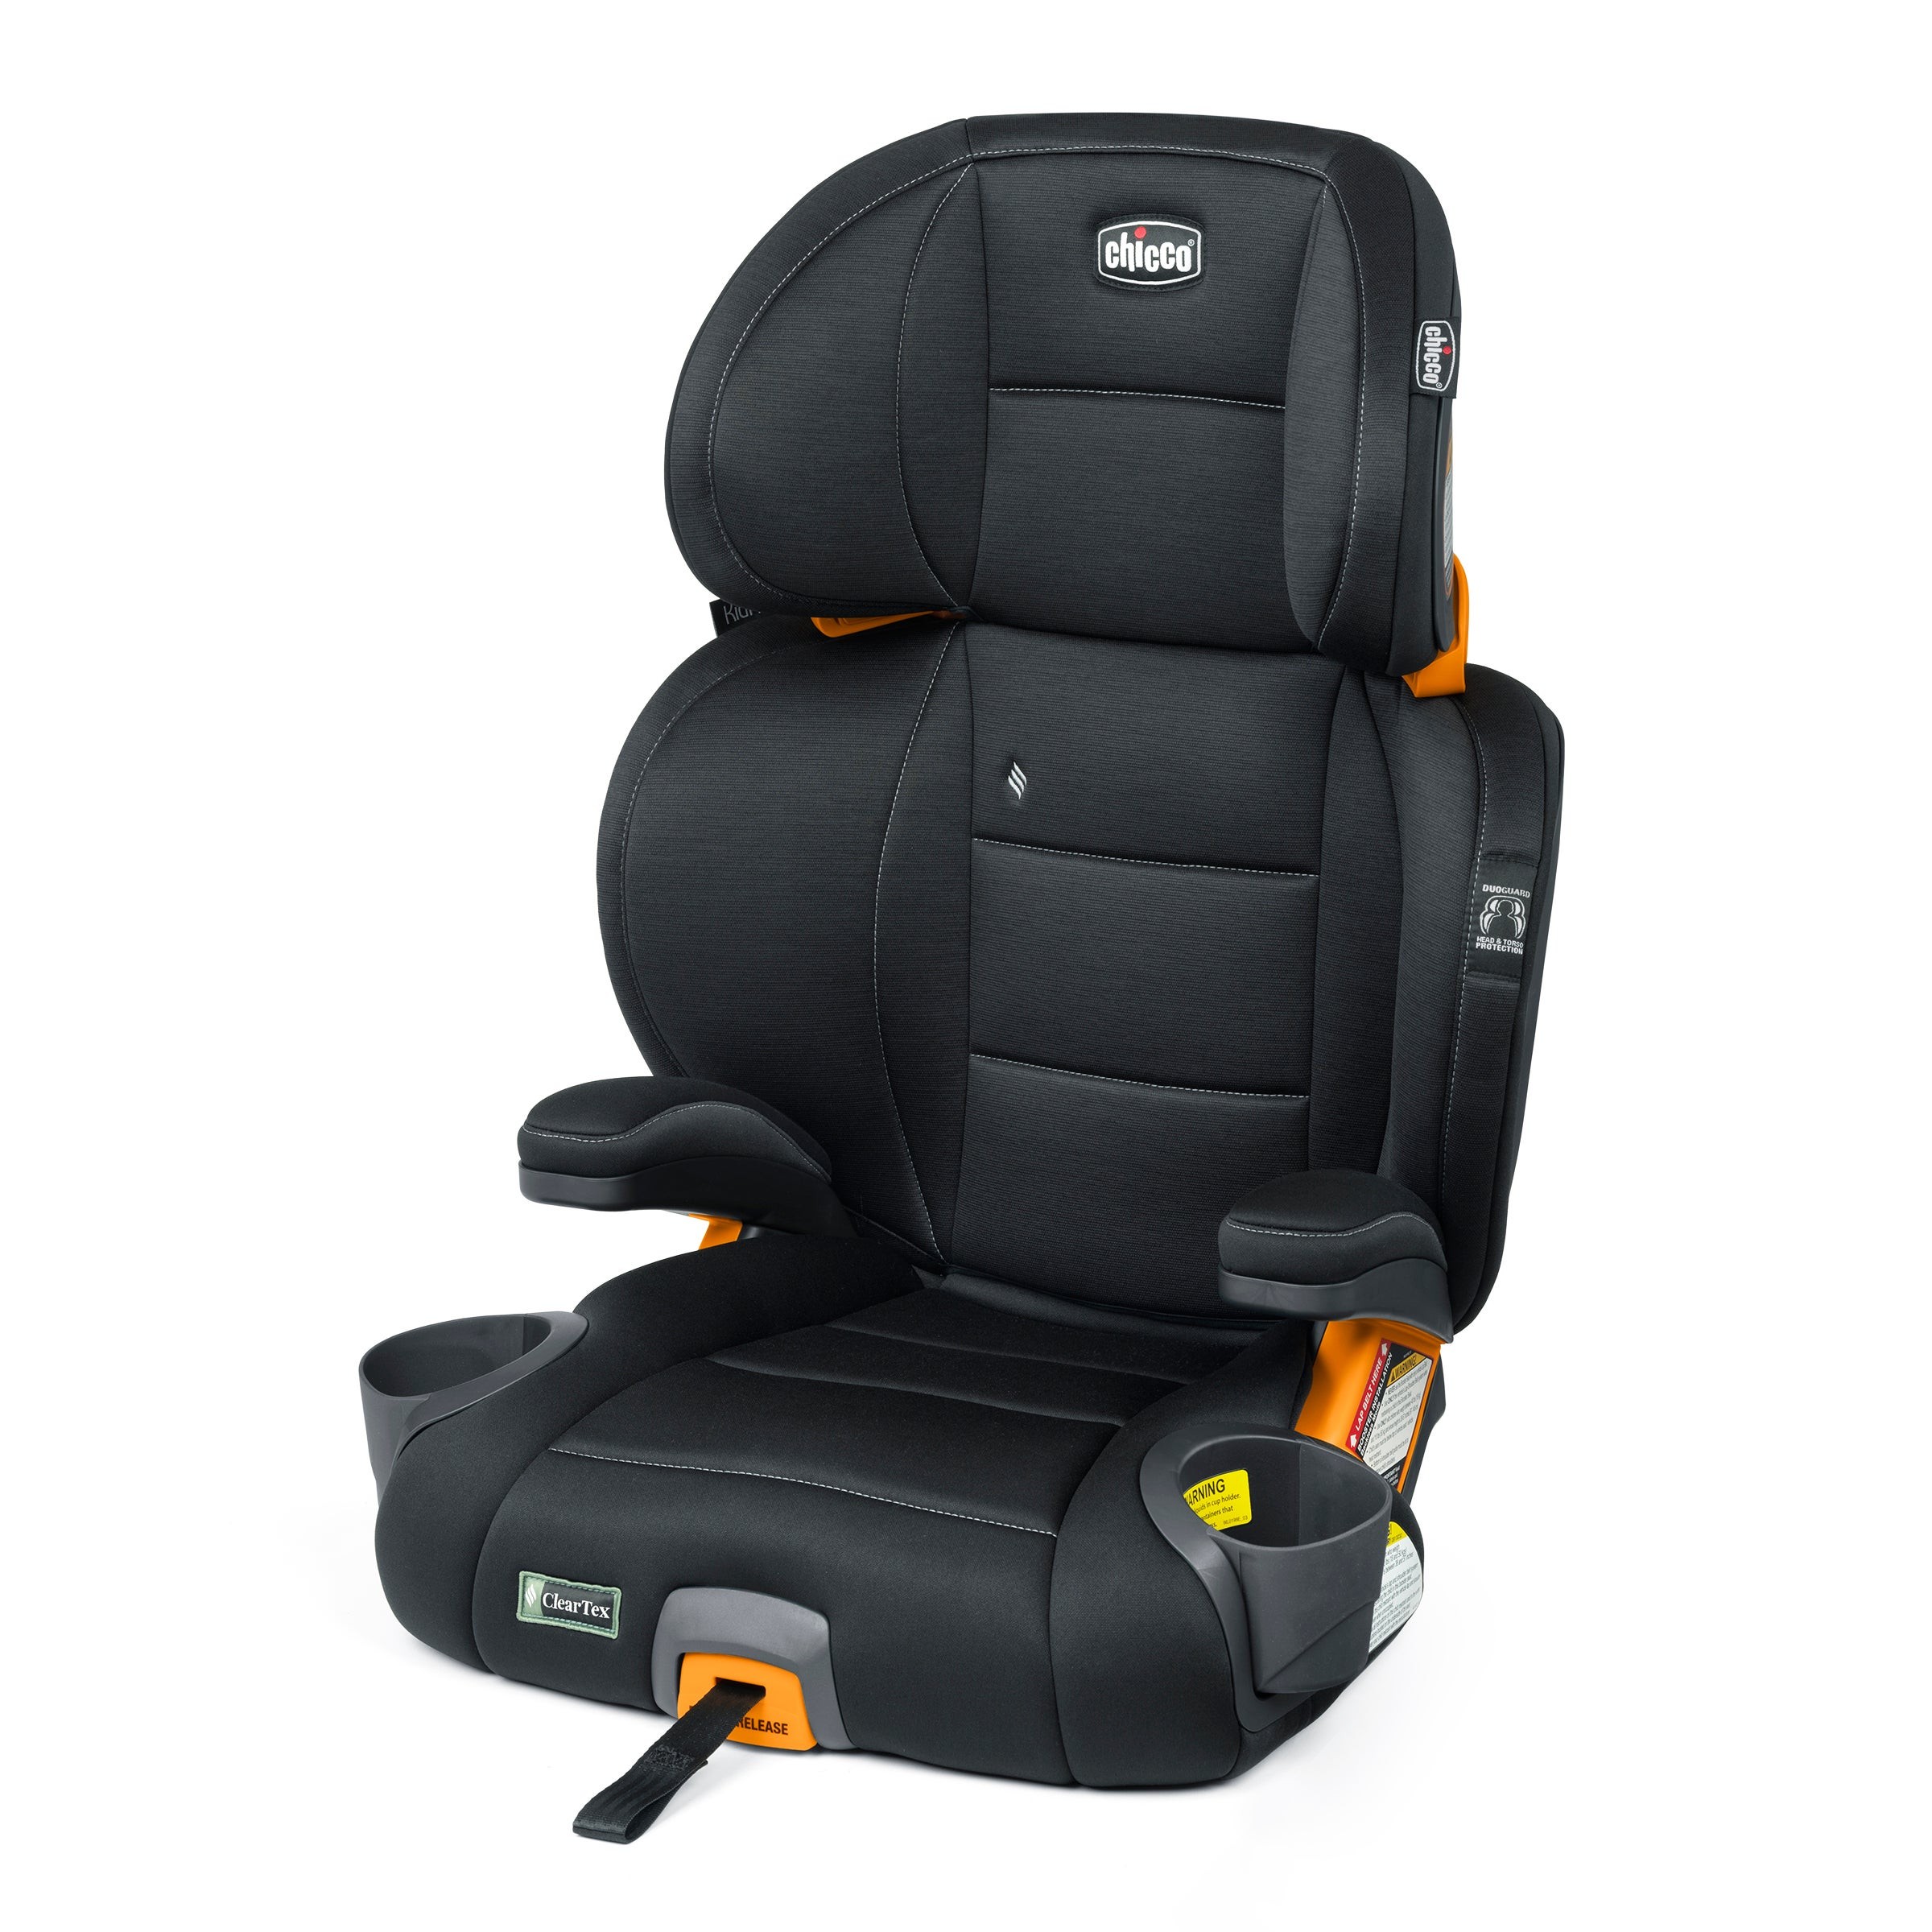 KidFit ClearTex Plus 2-in-1 Belt Positioning Booster Car Seat Obsidian